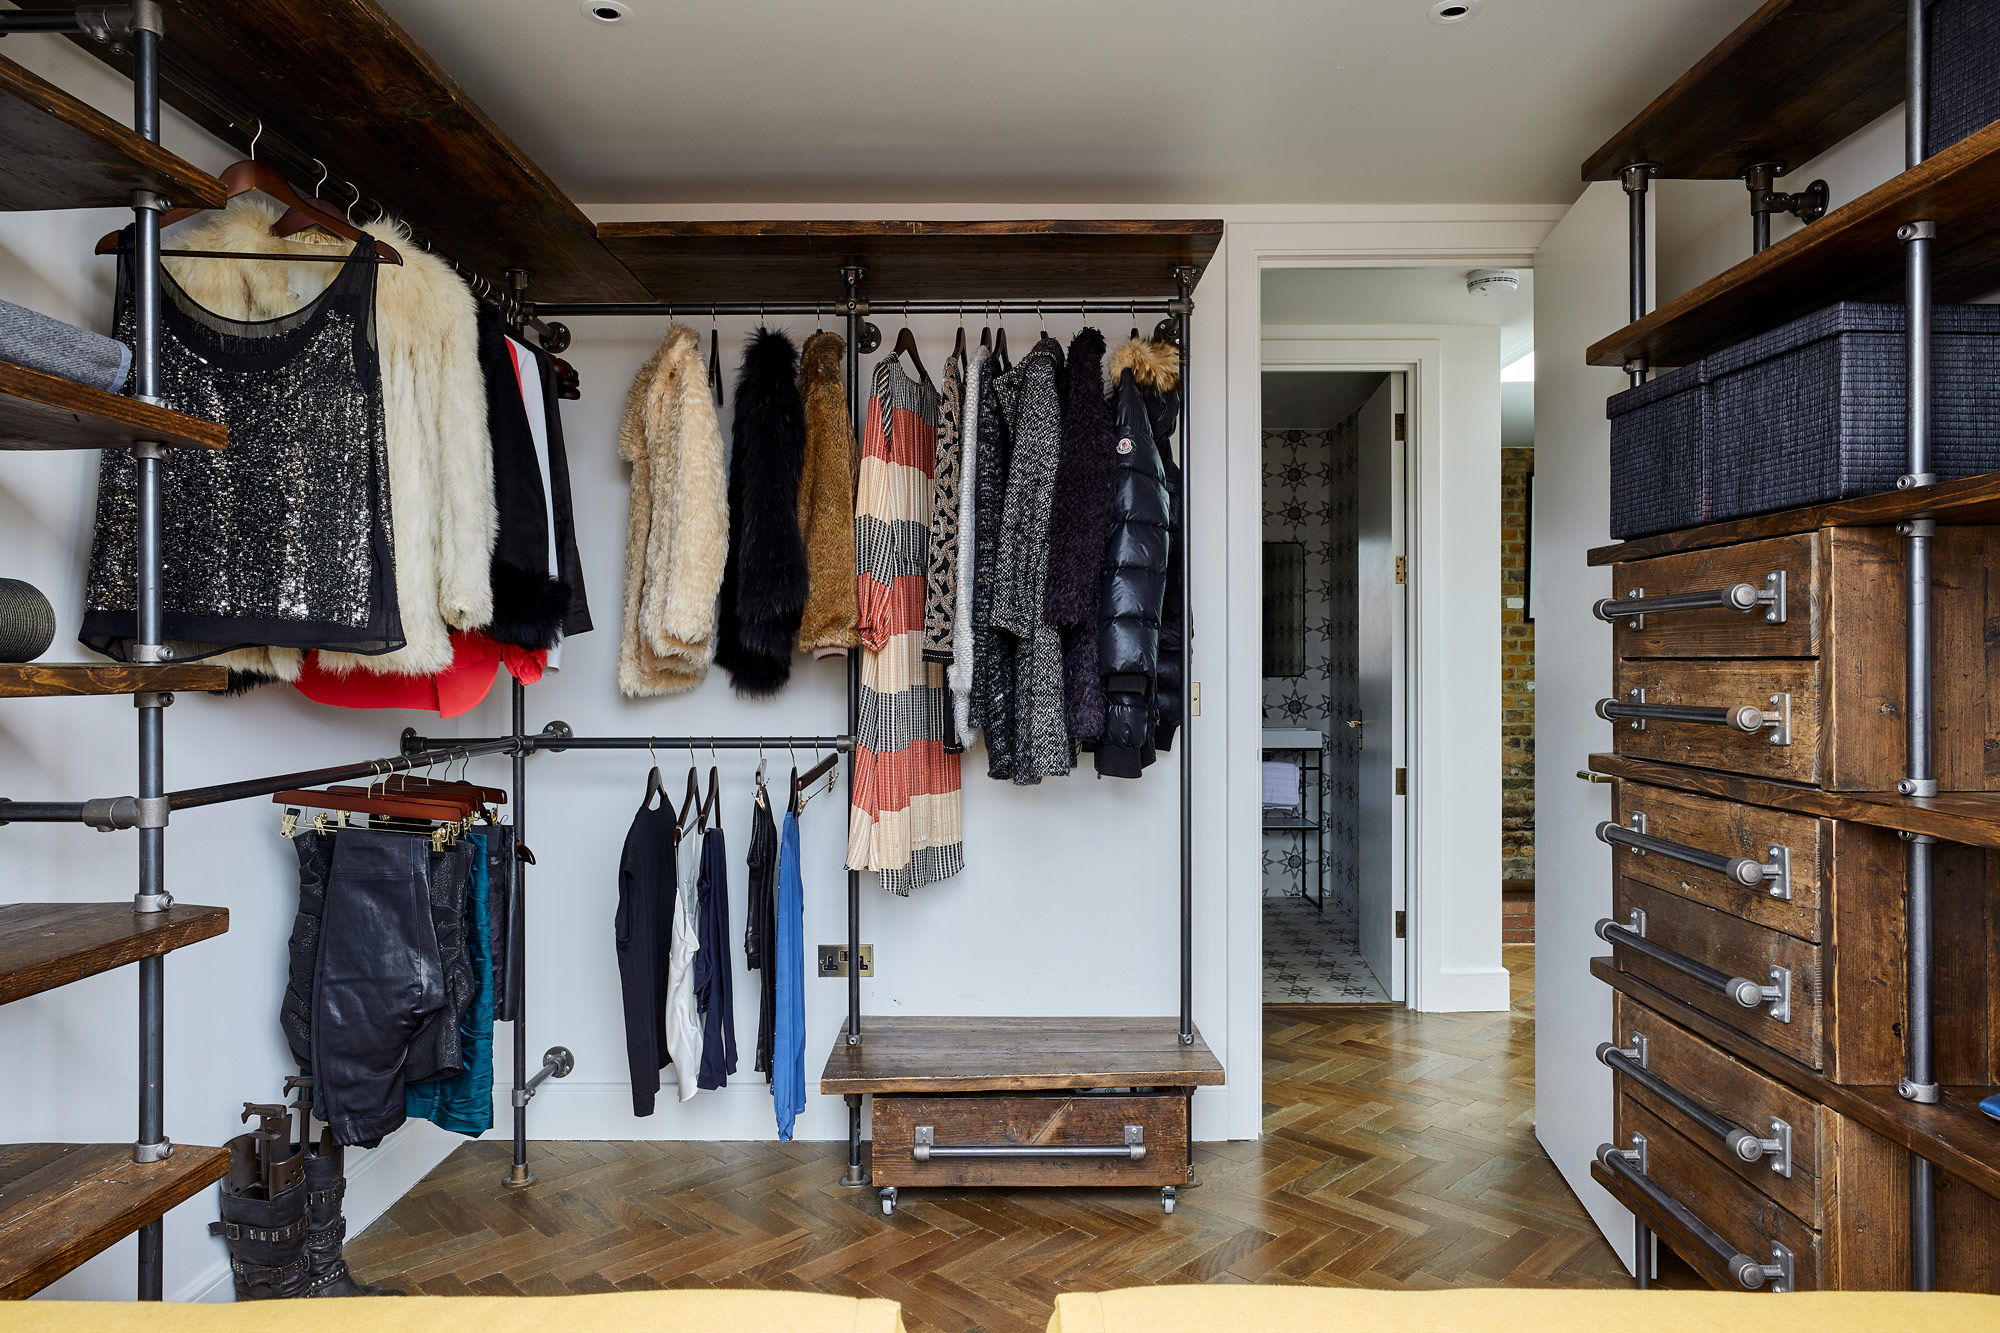 Open plan walk in wardrobe with rustic shelves and pipework